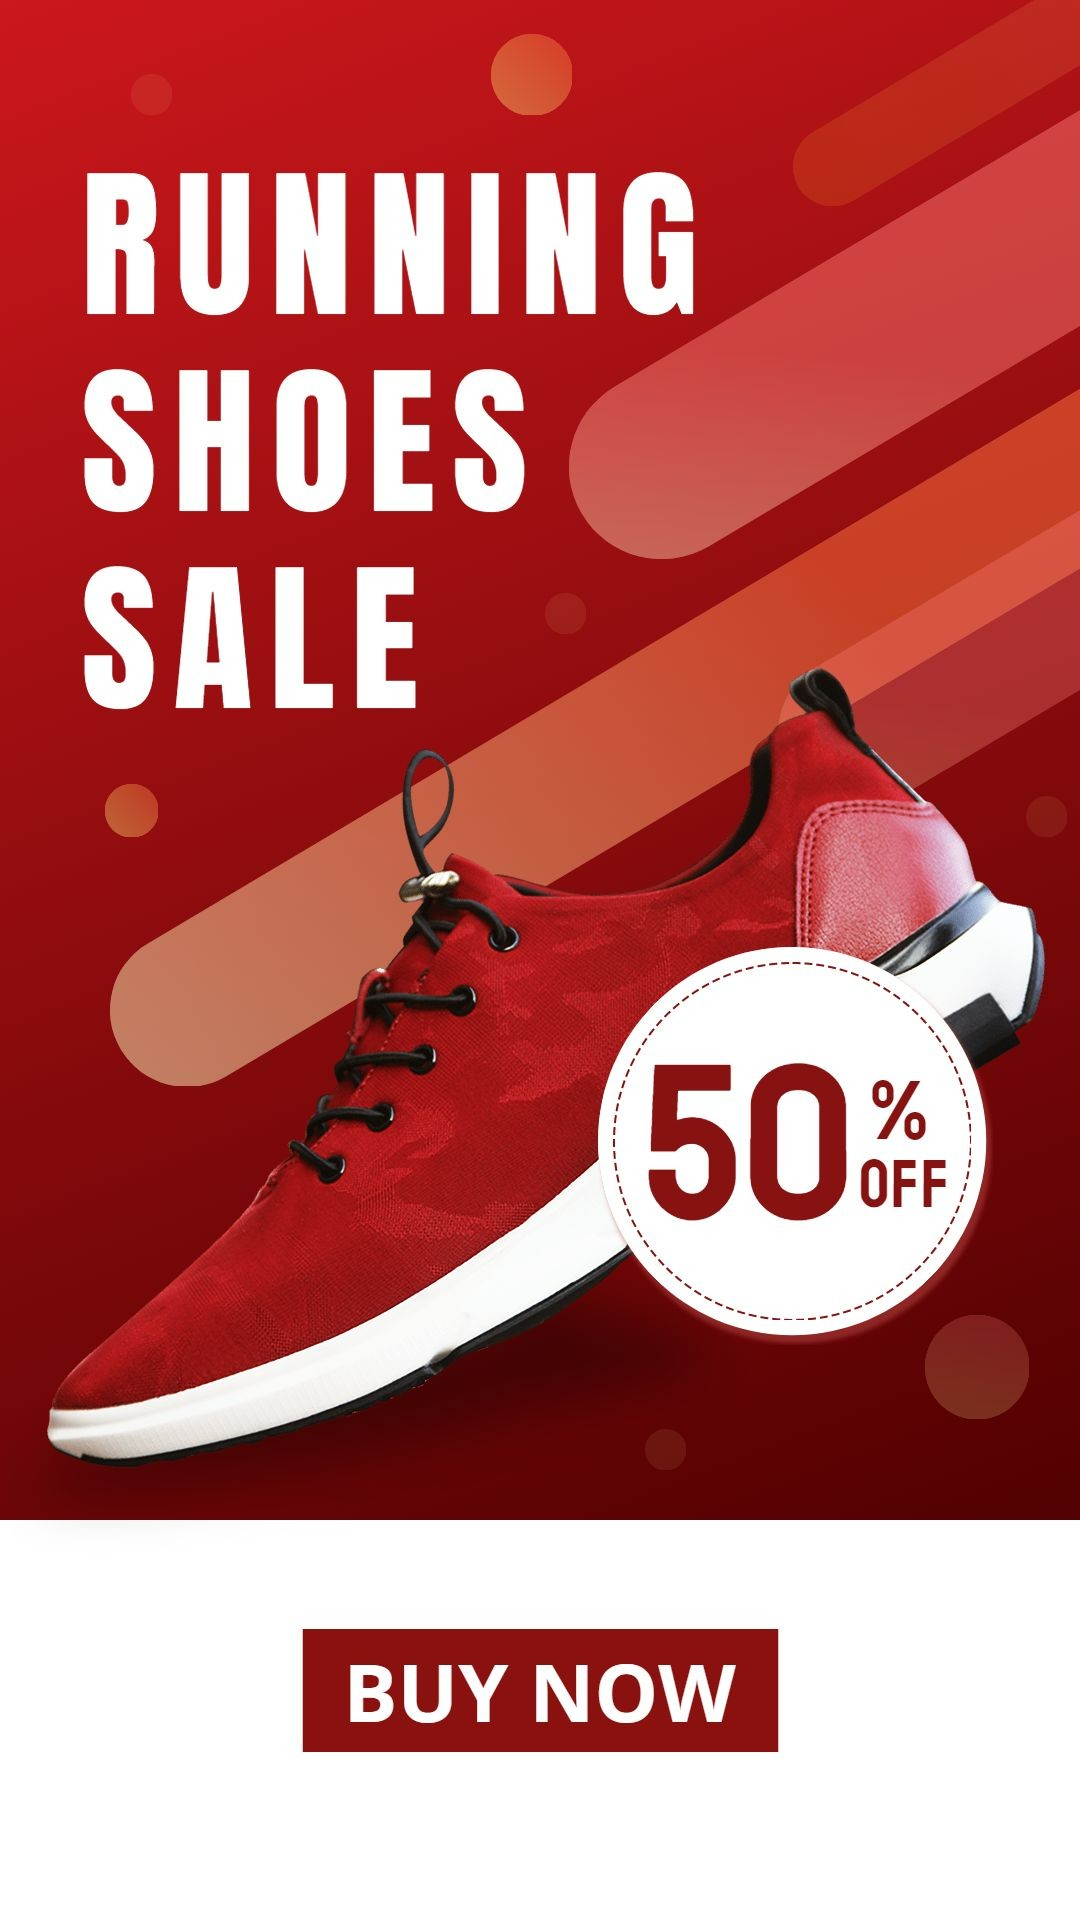 Running Shoes Sports Active Wear Fitness Product Sales Discount Promo Ecommerce Story预览效果